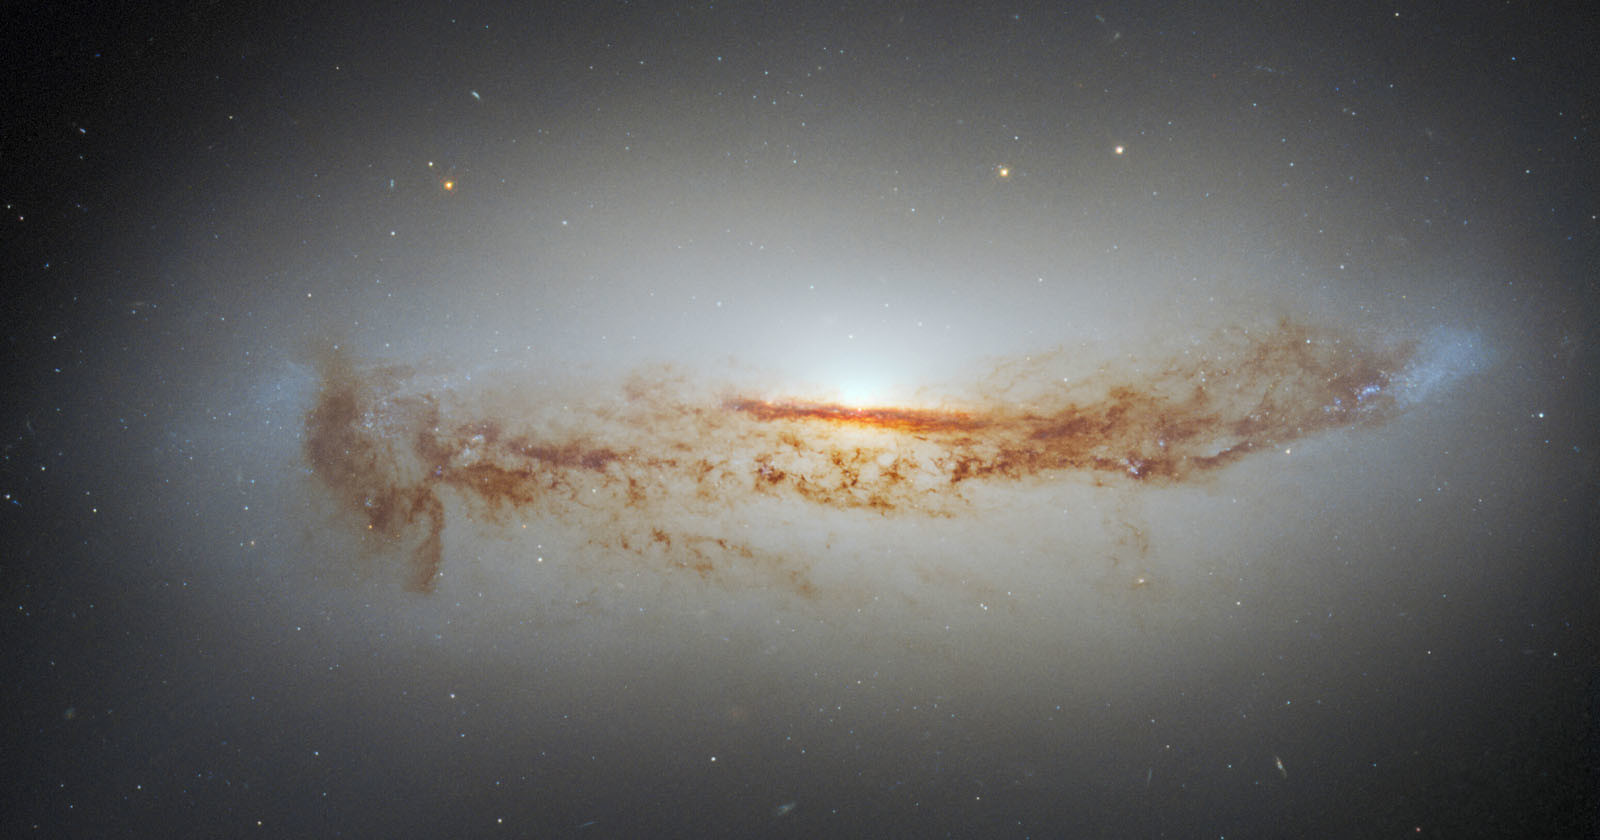 Hubble Photographs a Galaxy with a Supermassive Black Hole Core